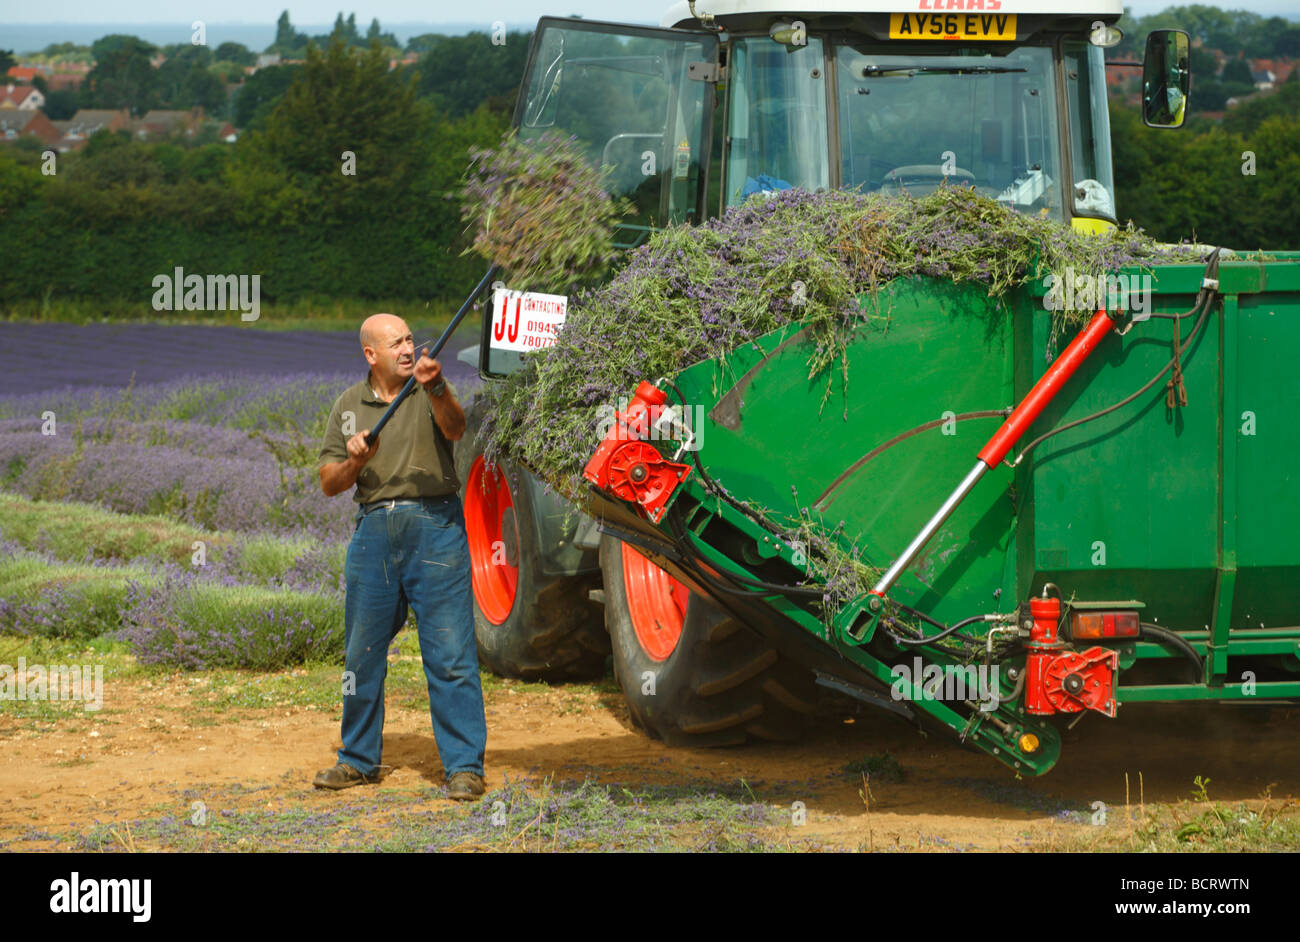 A farm worker loading freshly harvested lavender onto a tractor. Stock Photo